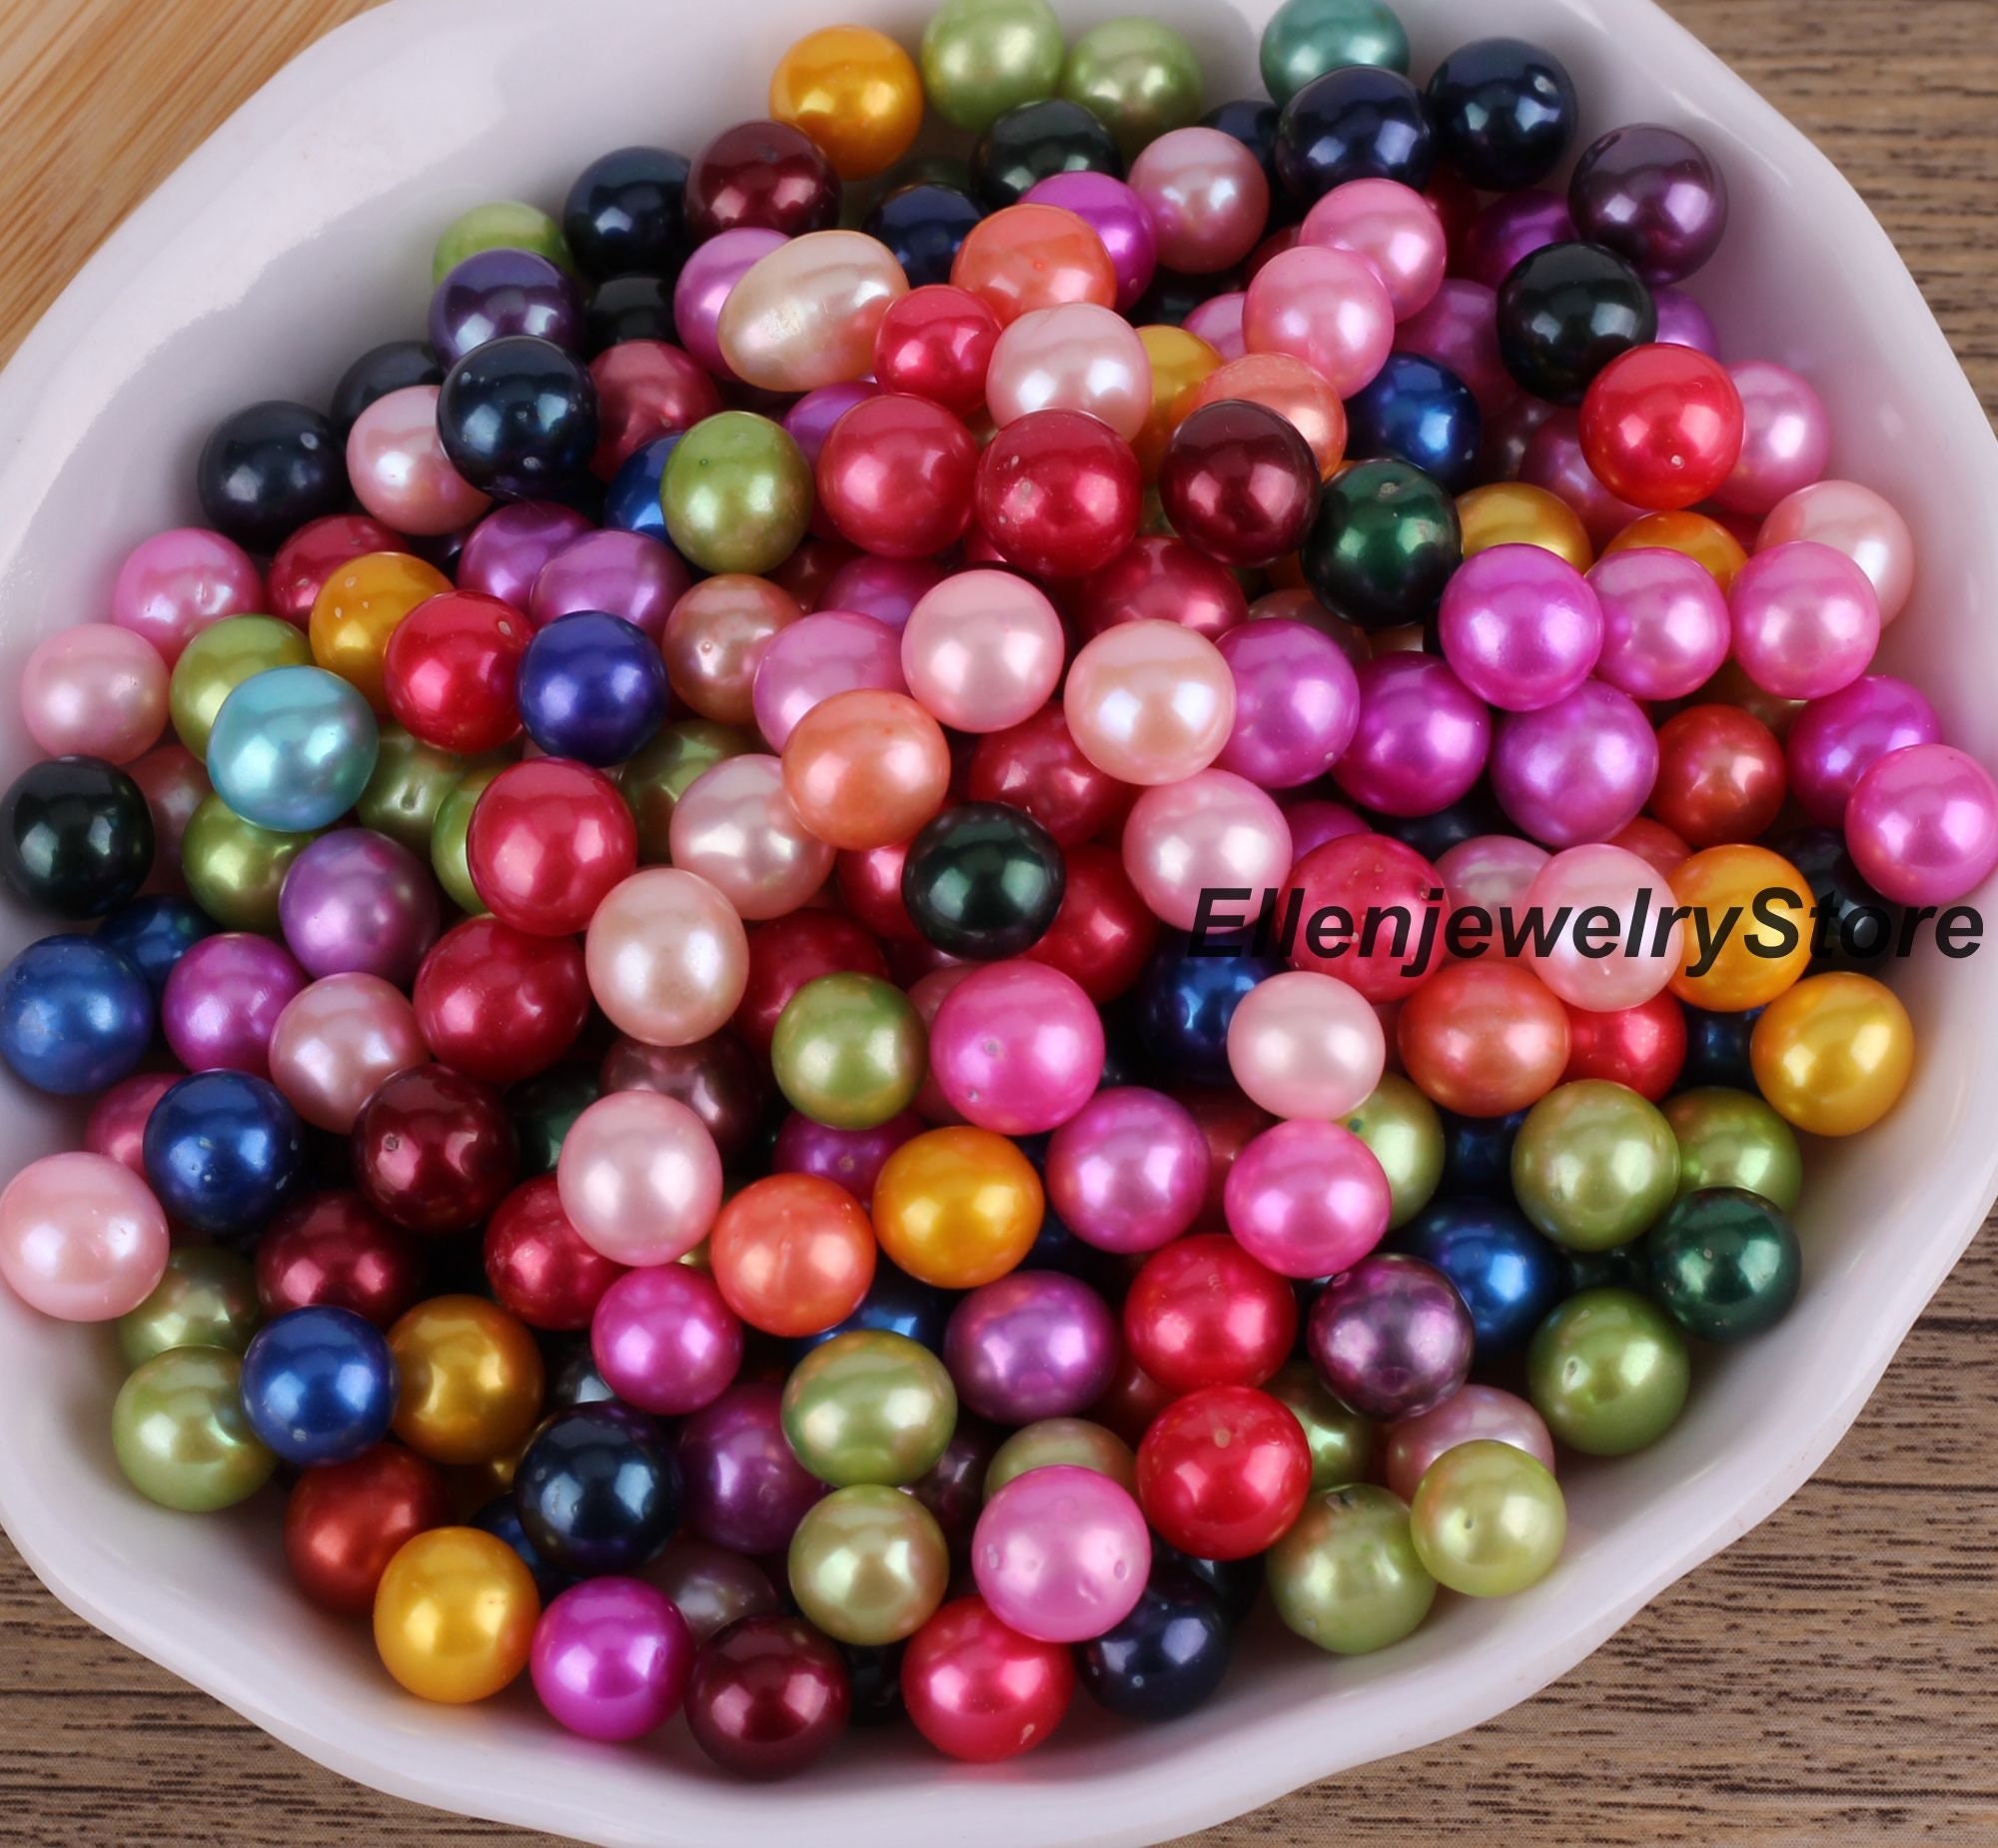 Feildoo 6 mm ABS Faux Pearls No Hole, Faux Pearl Beads Filler Beads Jewelry  Making Rainbow Beads for Craft Necklaces Bracelets Jewelry Making - 100g,  Gradient 